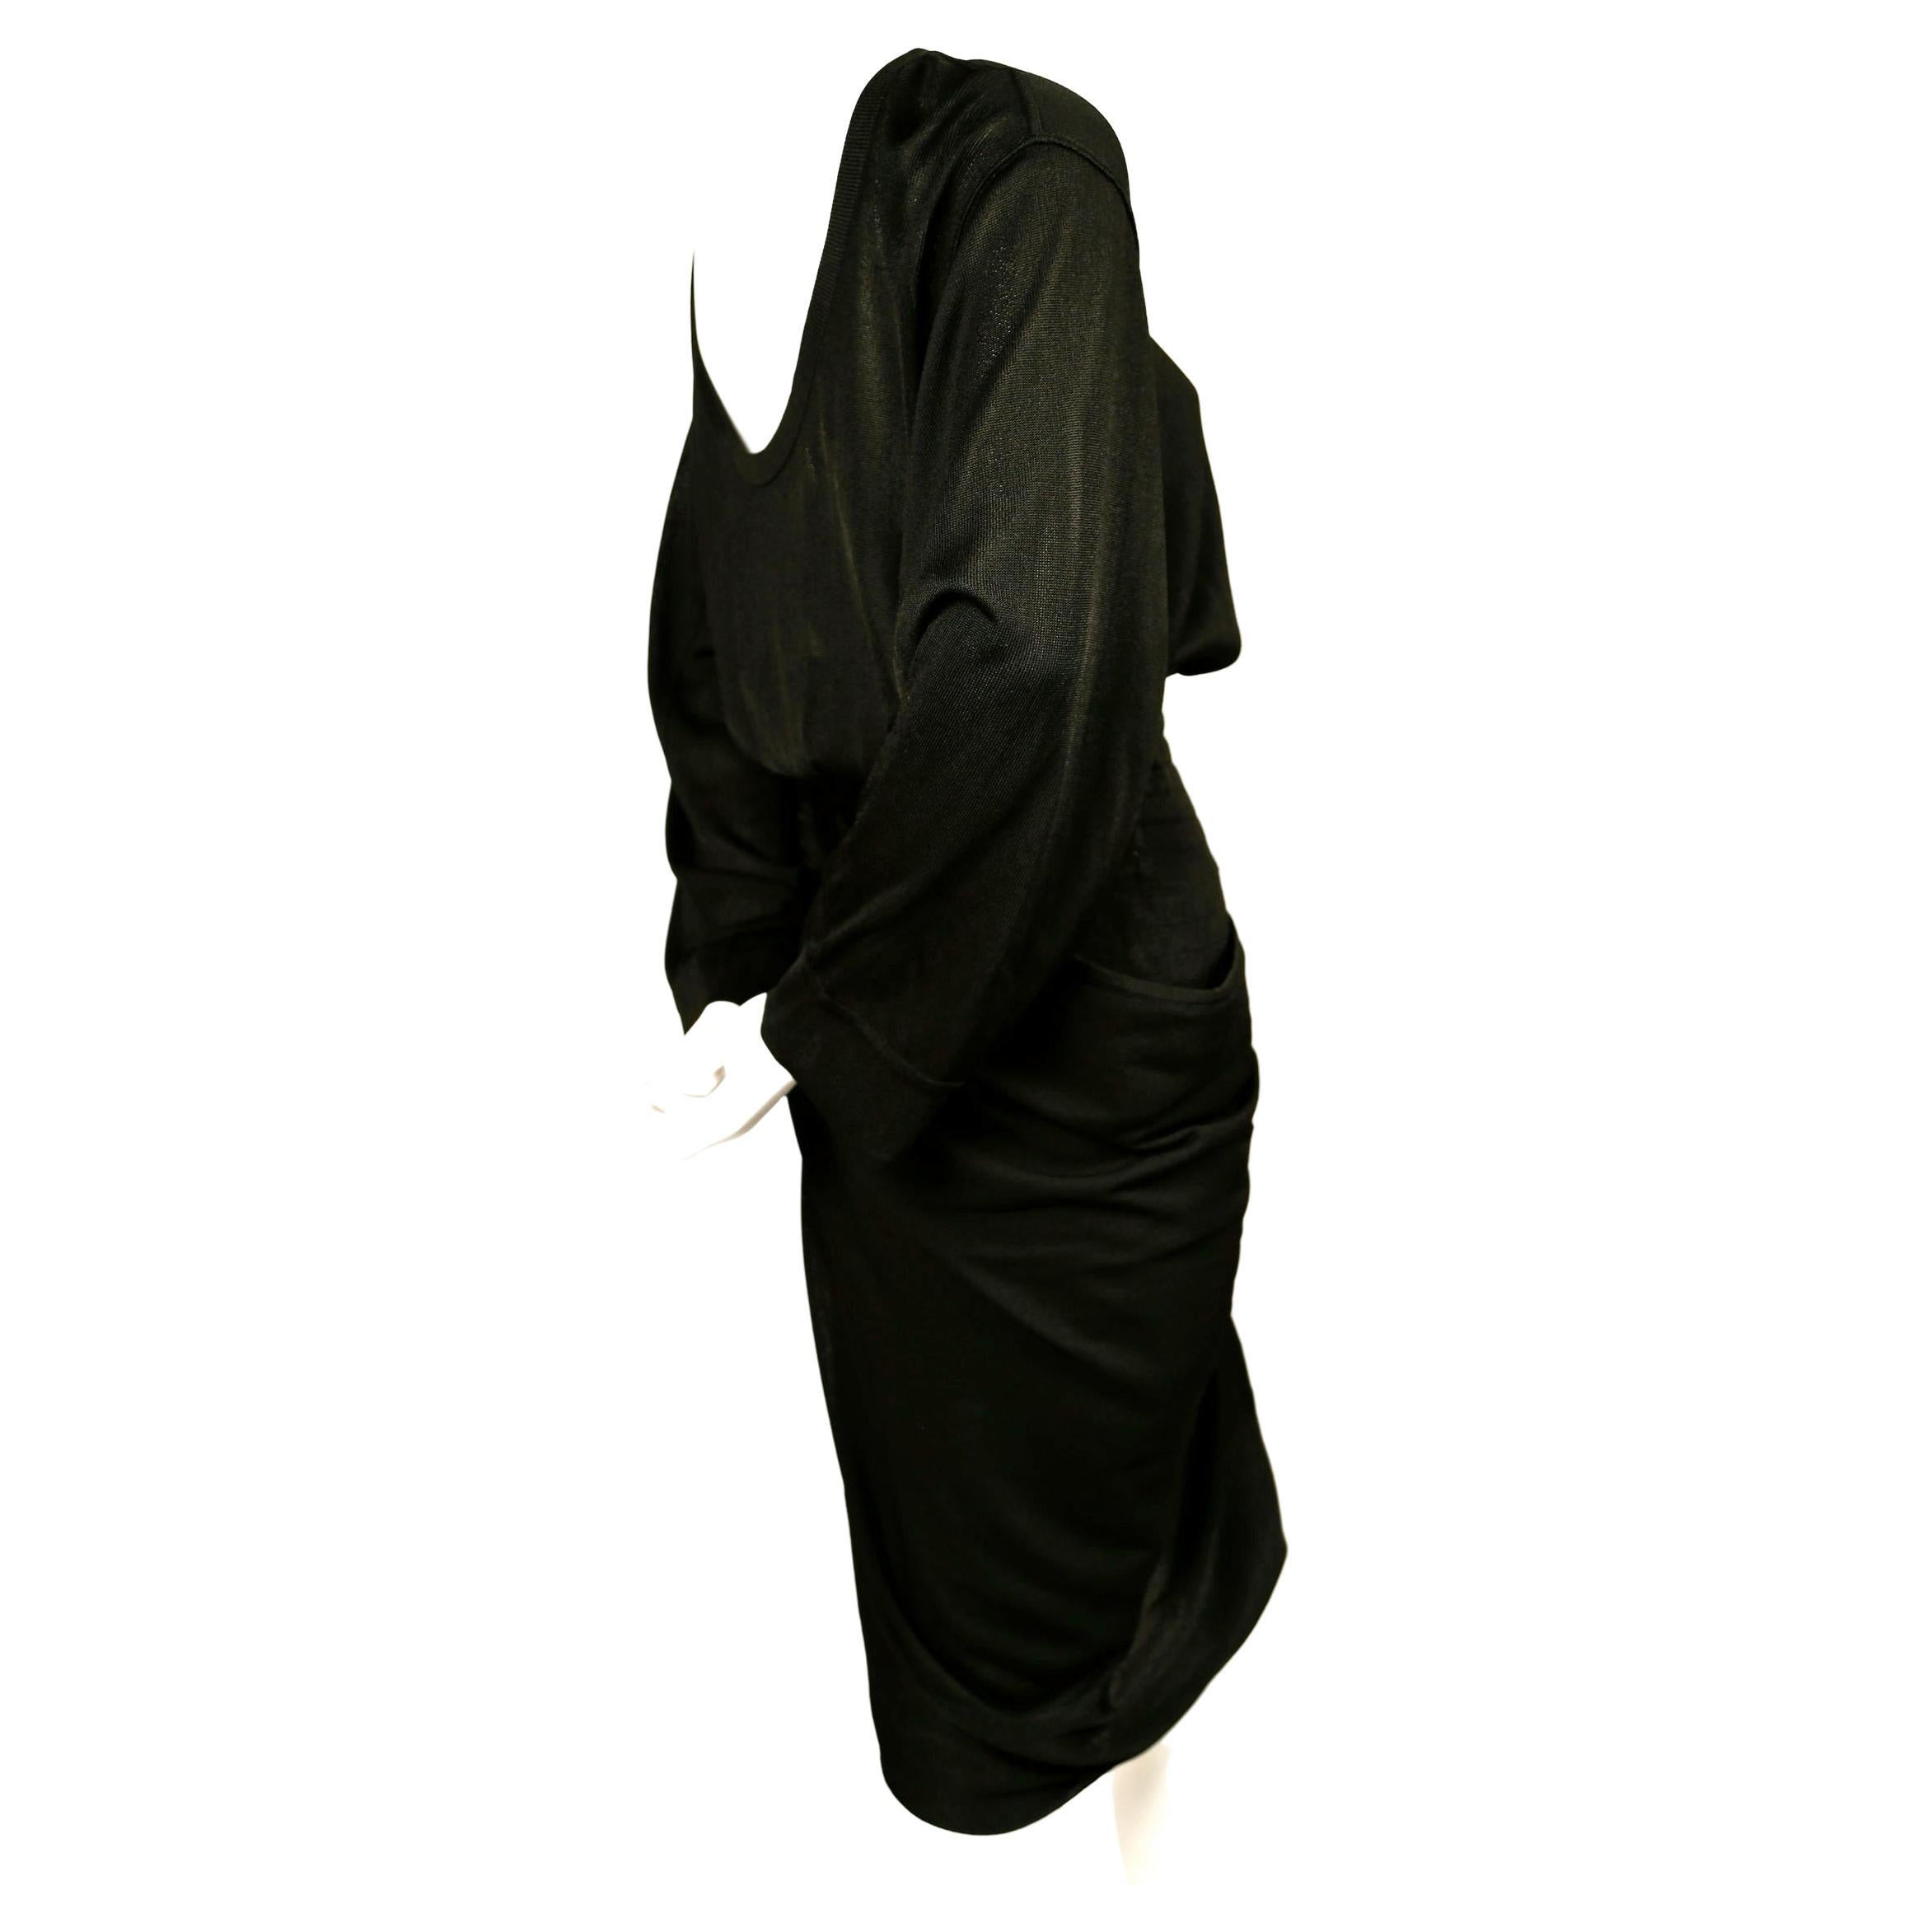  1984 AZZEDINE ALAIA jet black summer playsuit with draped skirt In Excellent Condition For Sale In San Fransisco, CA